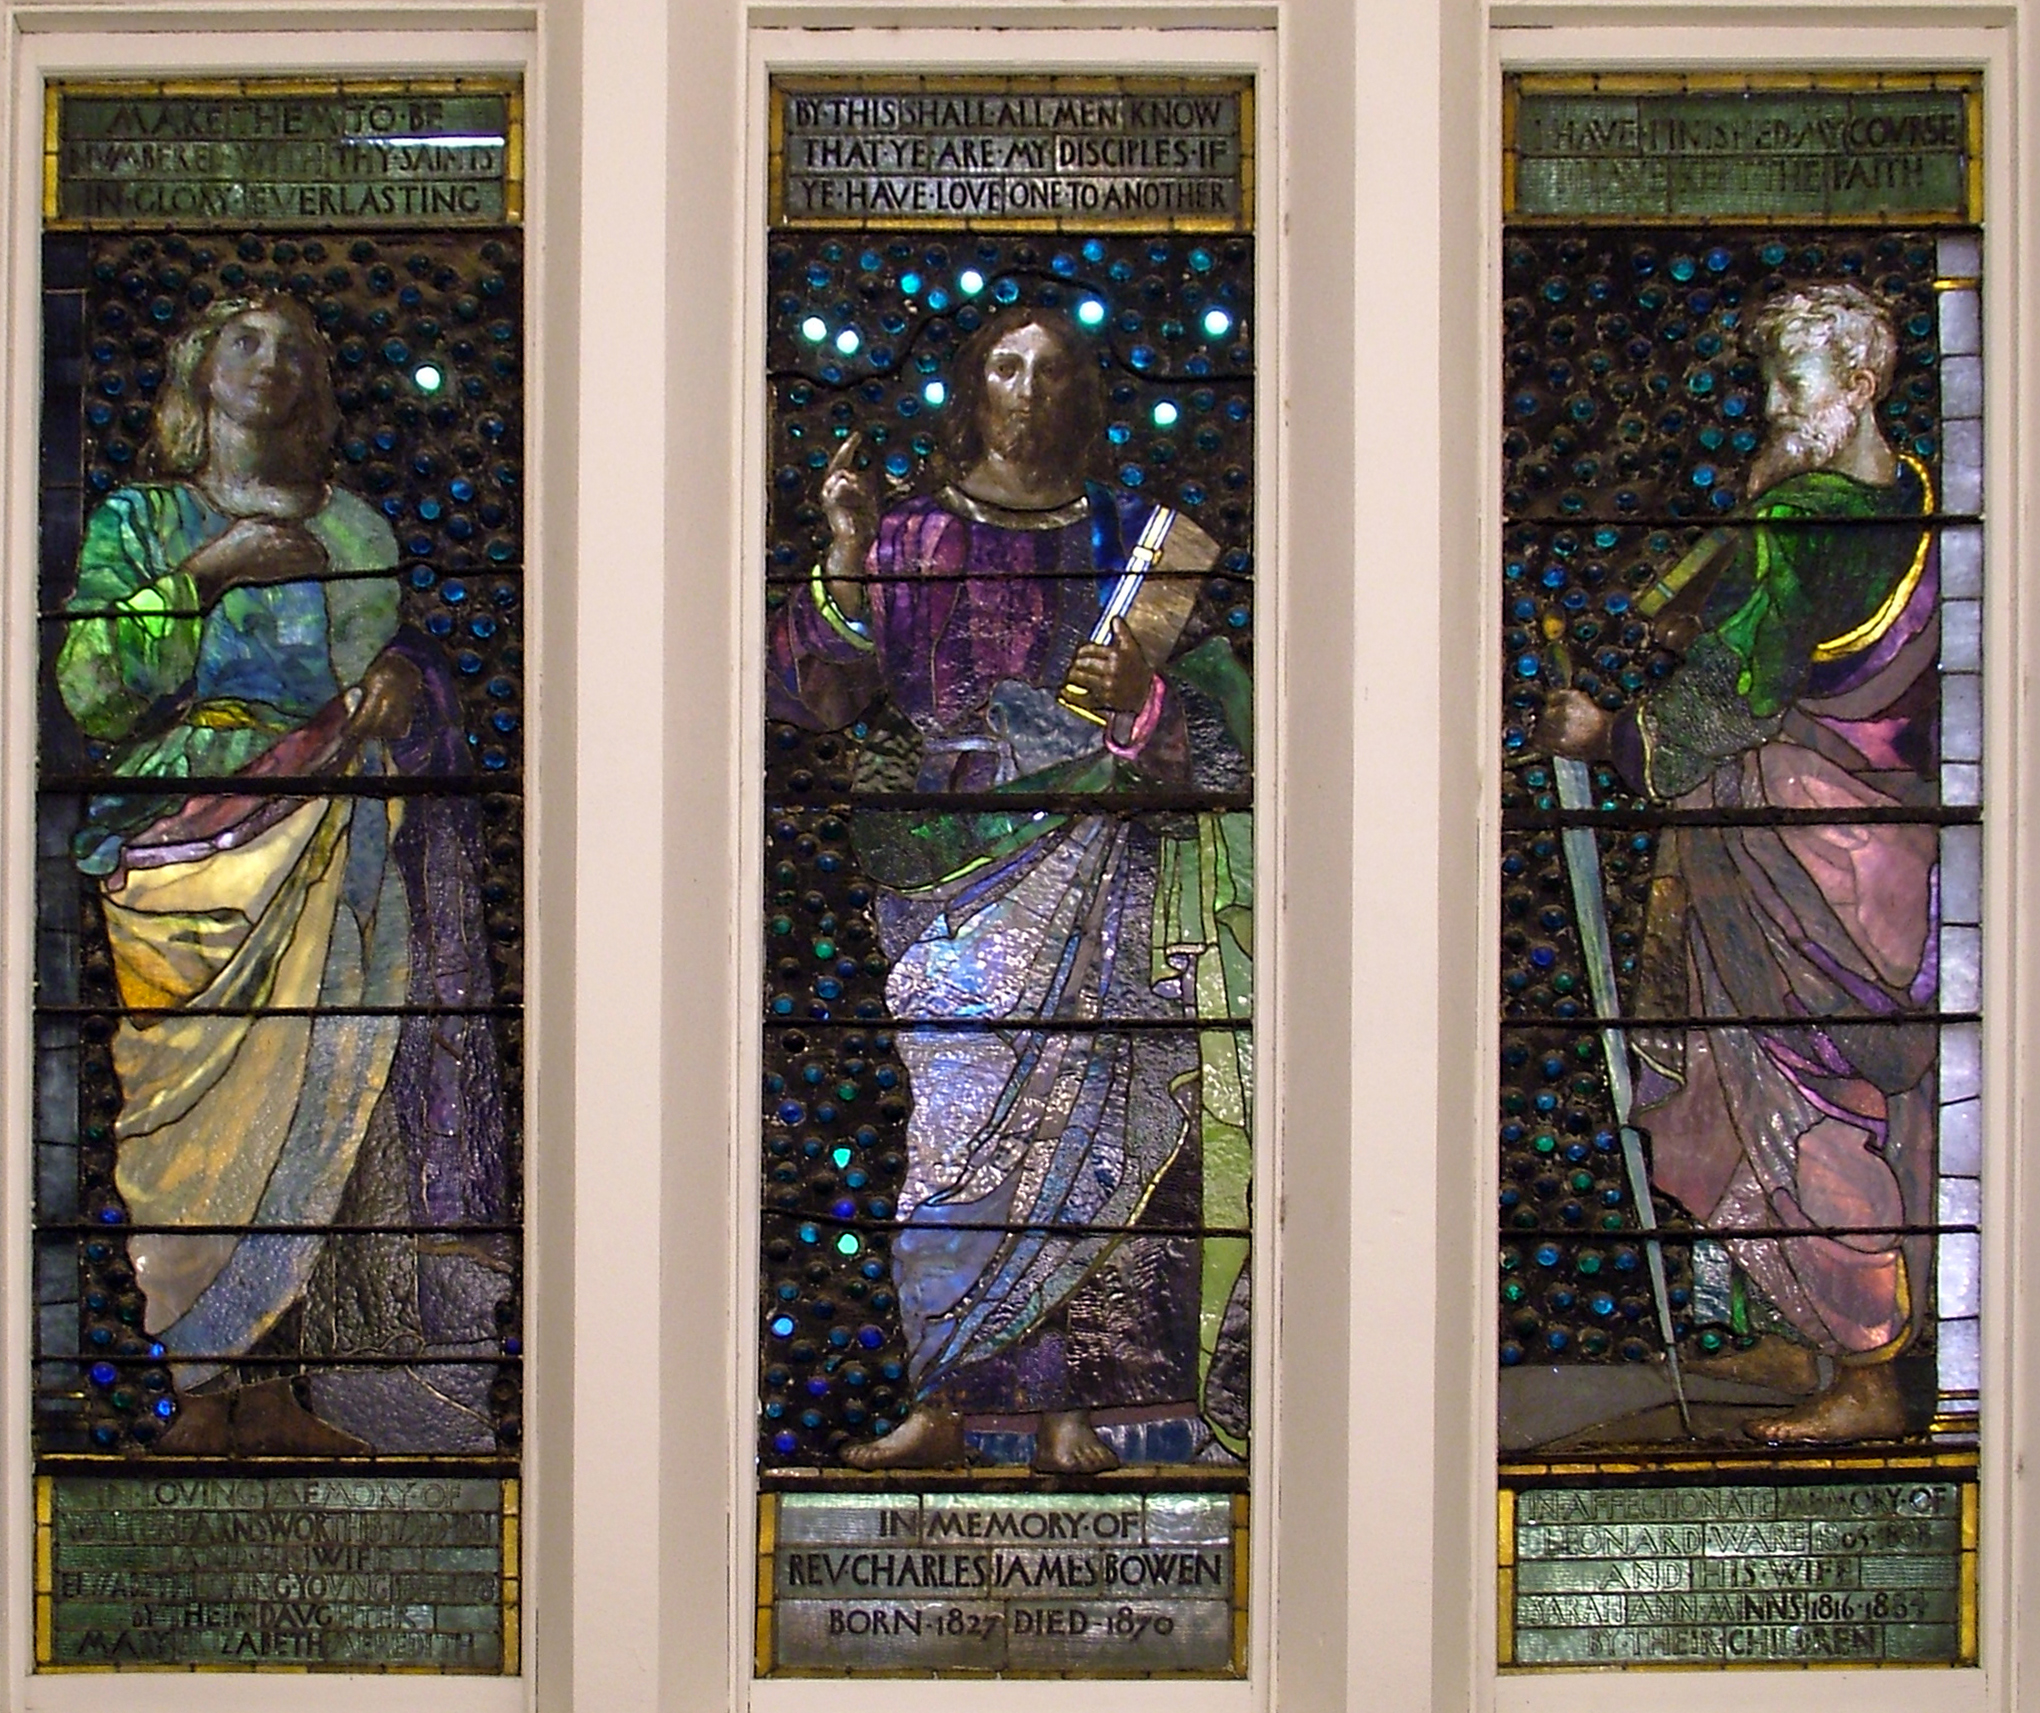 The John La Farge Triptych will be on display at this year's Boston International Fine Art Show